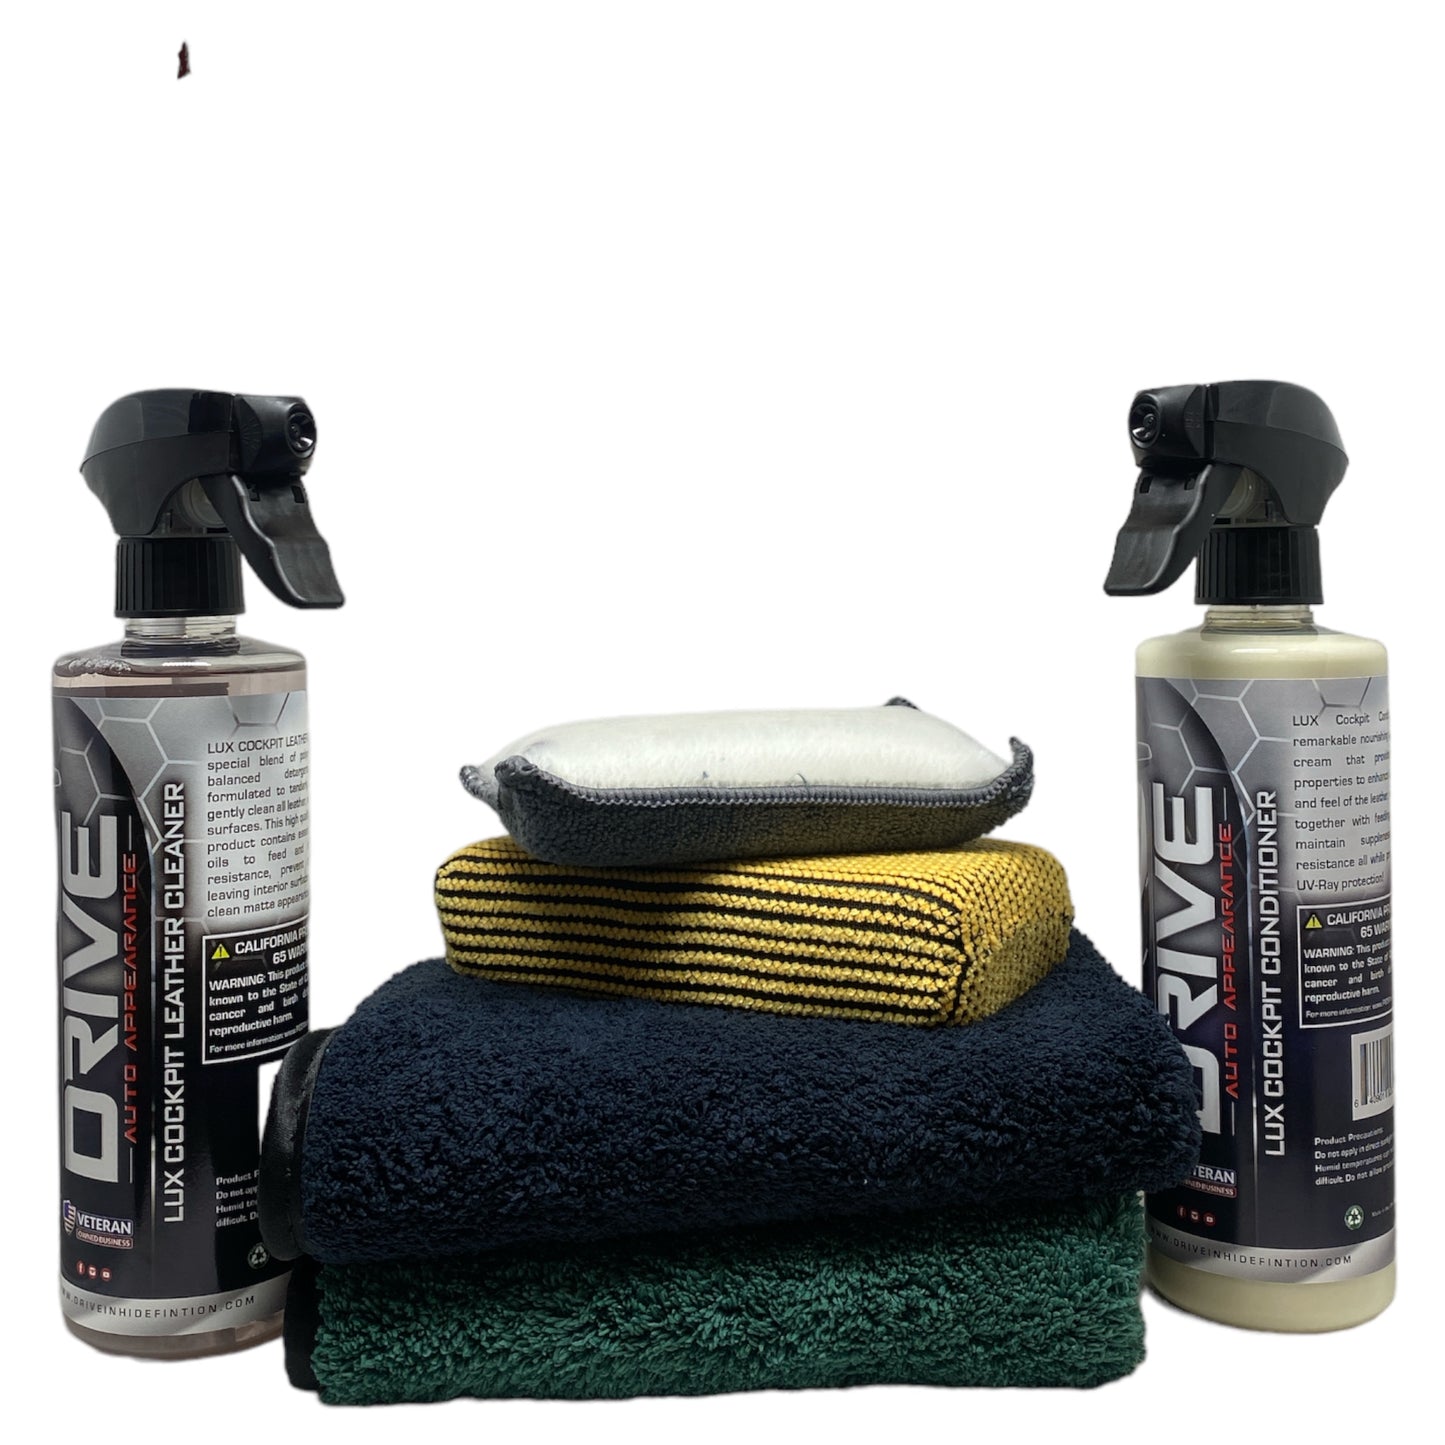 LUX LEATHER CARE KIT